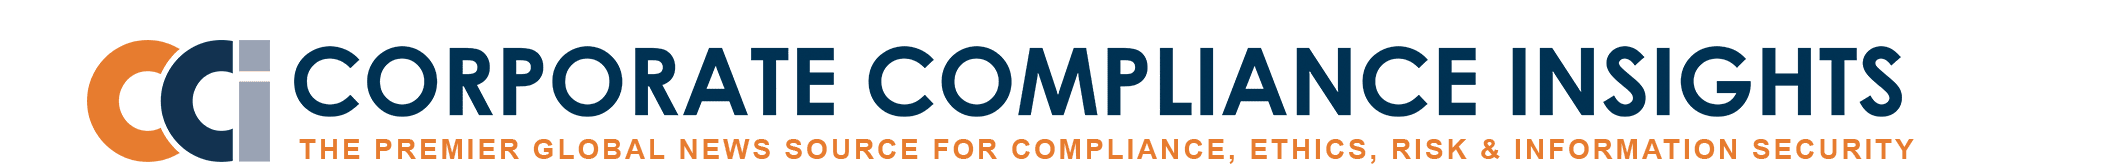 Corporate Compliance Insights